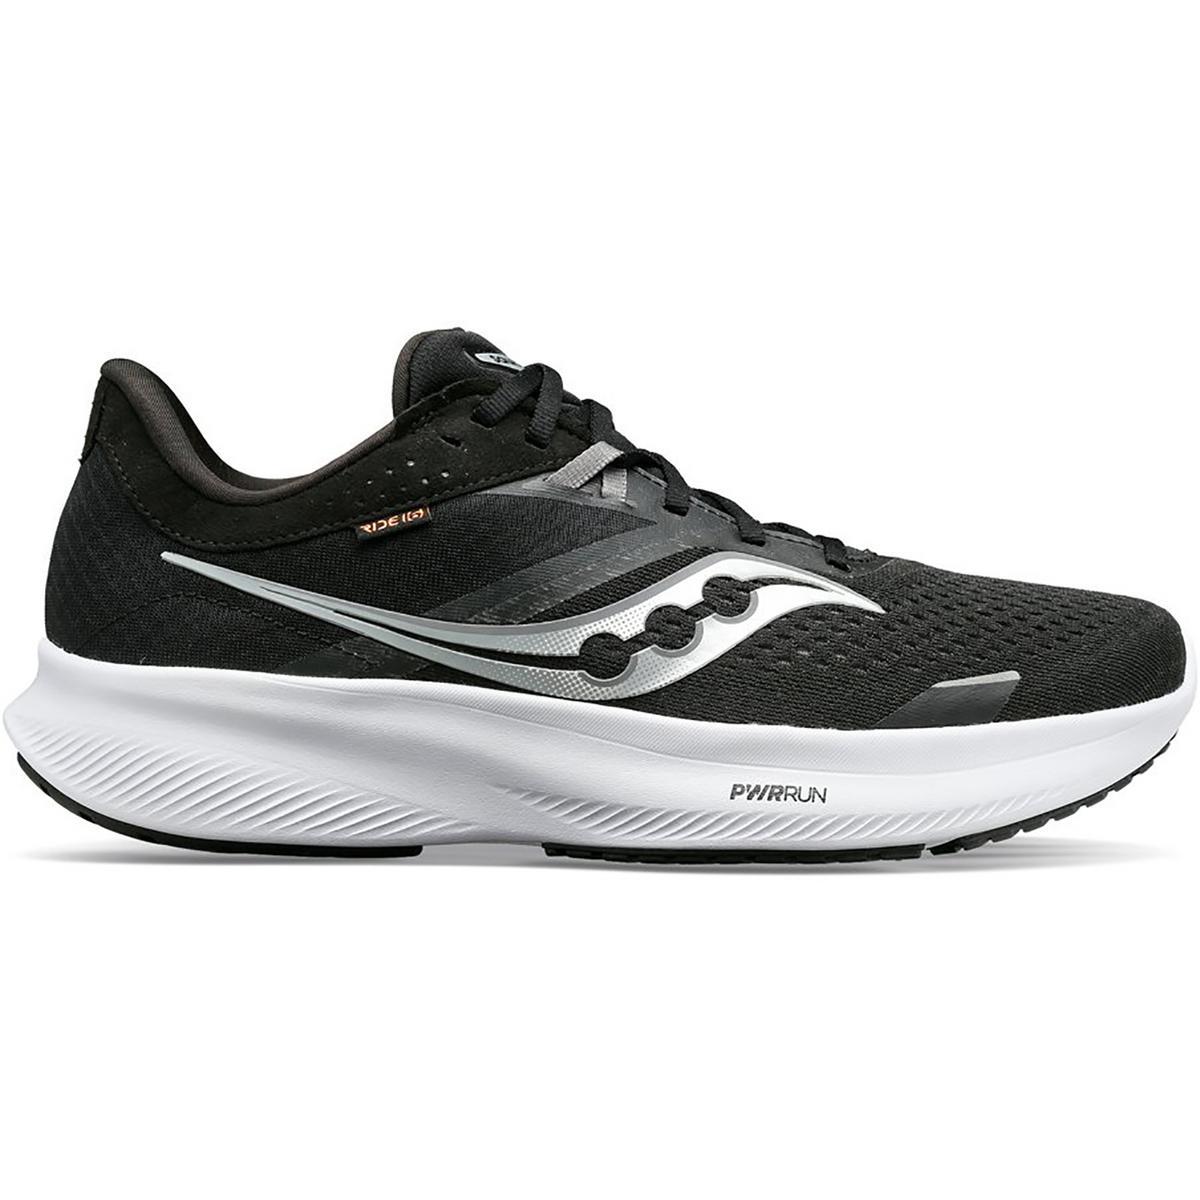 Saucony Mens Ride 16 Fitness Workout Running Training Shoes Sneakers Bhfo 2879 Black/White